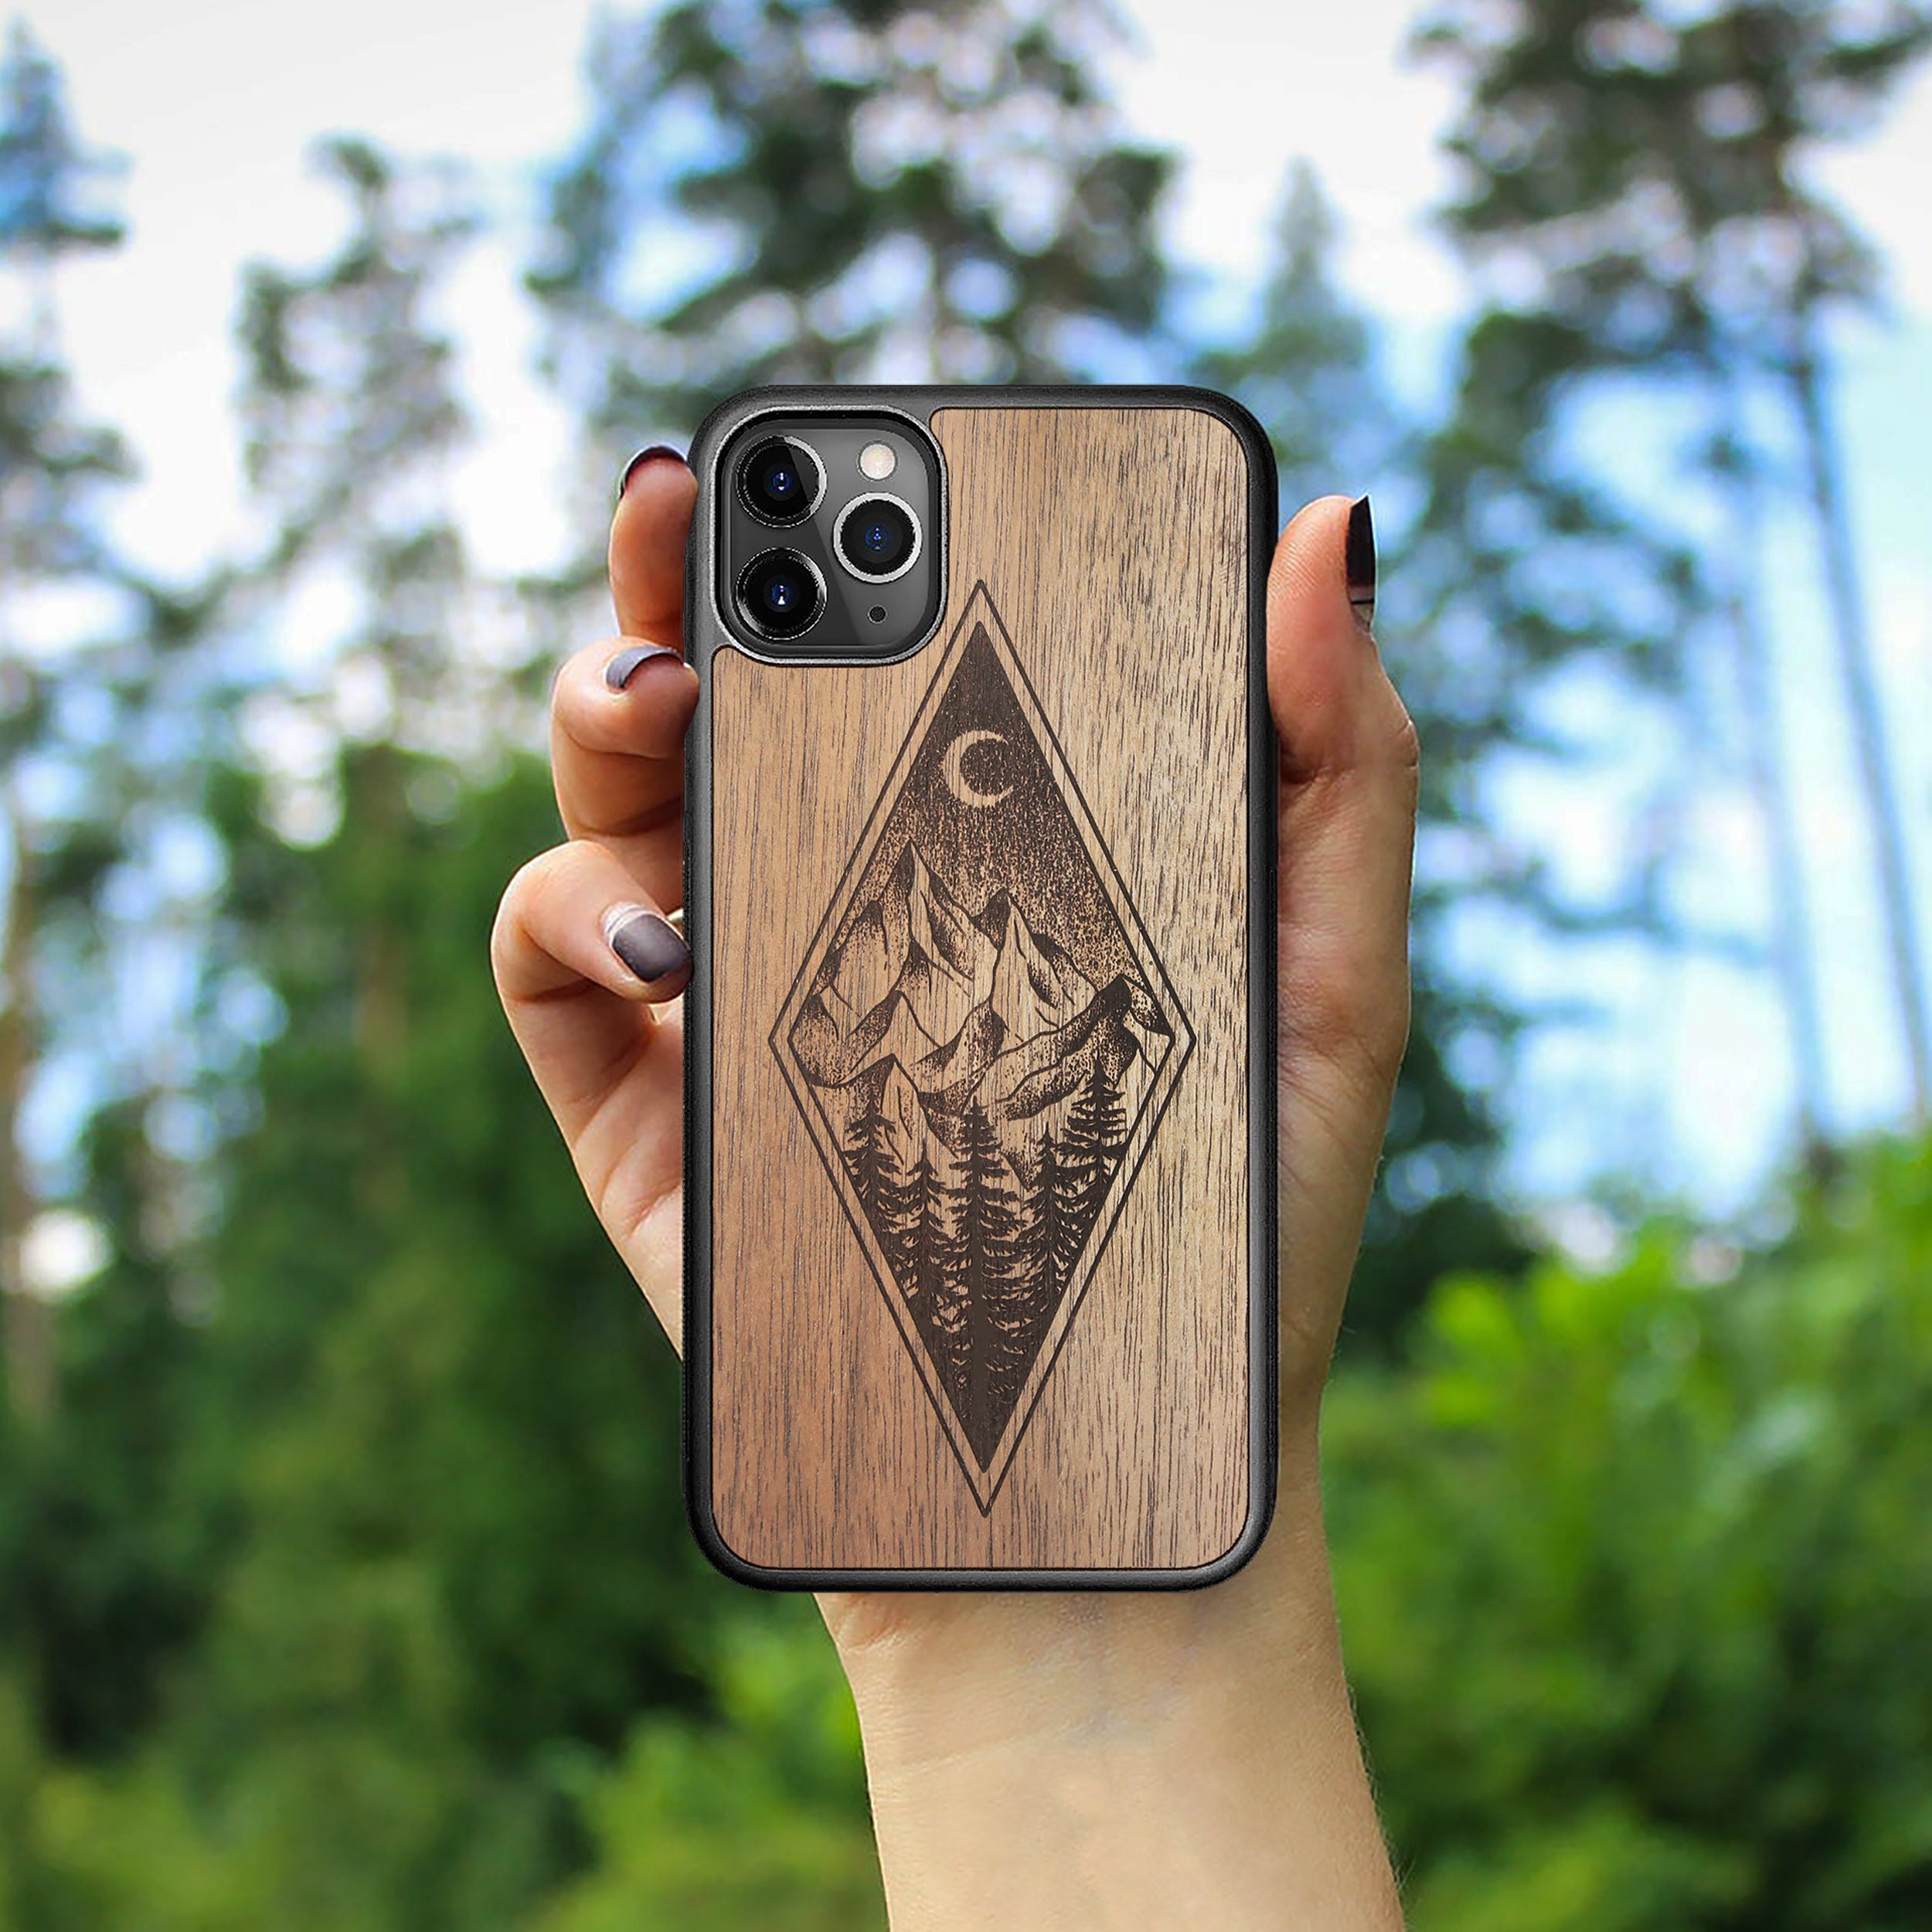 Mountain Wooden Iphone Case For Iphone 12 Pro Max 12 Mini Etsy